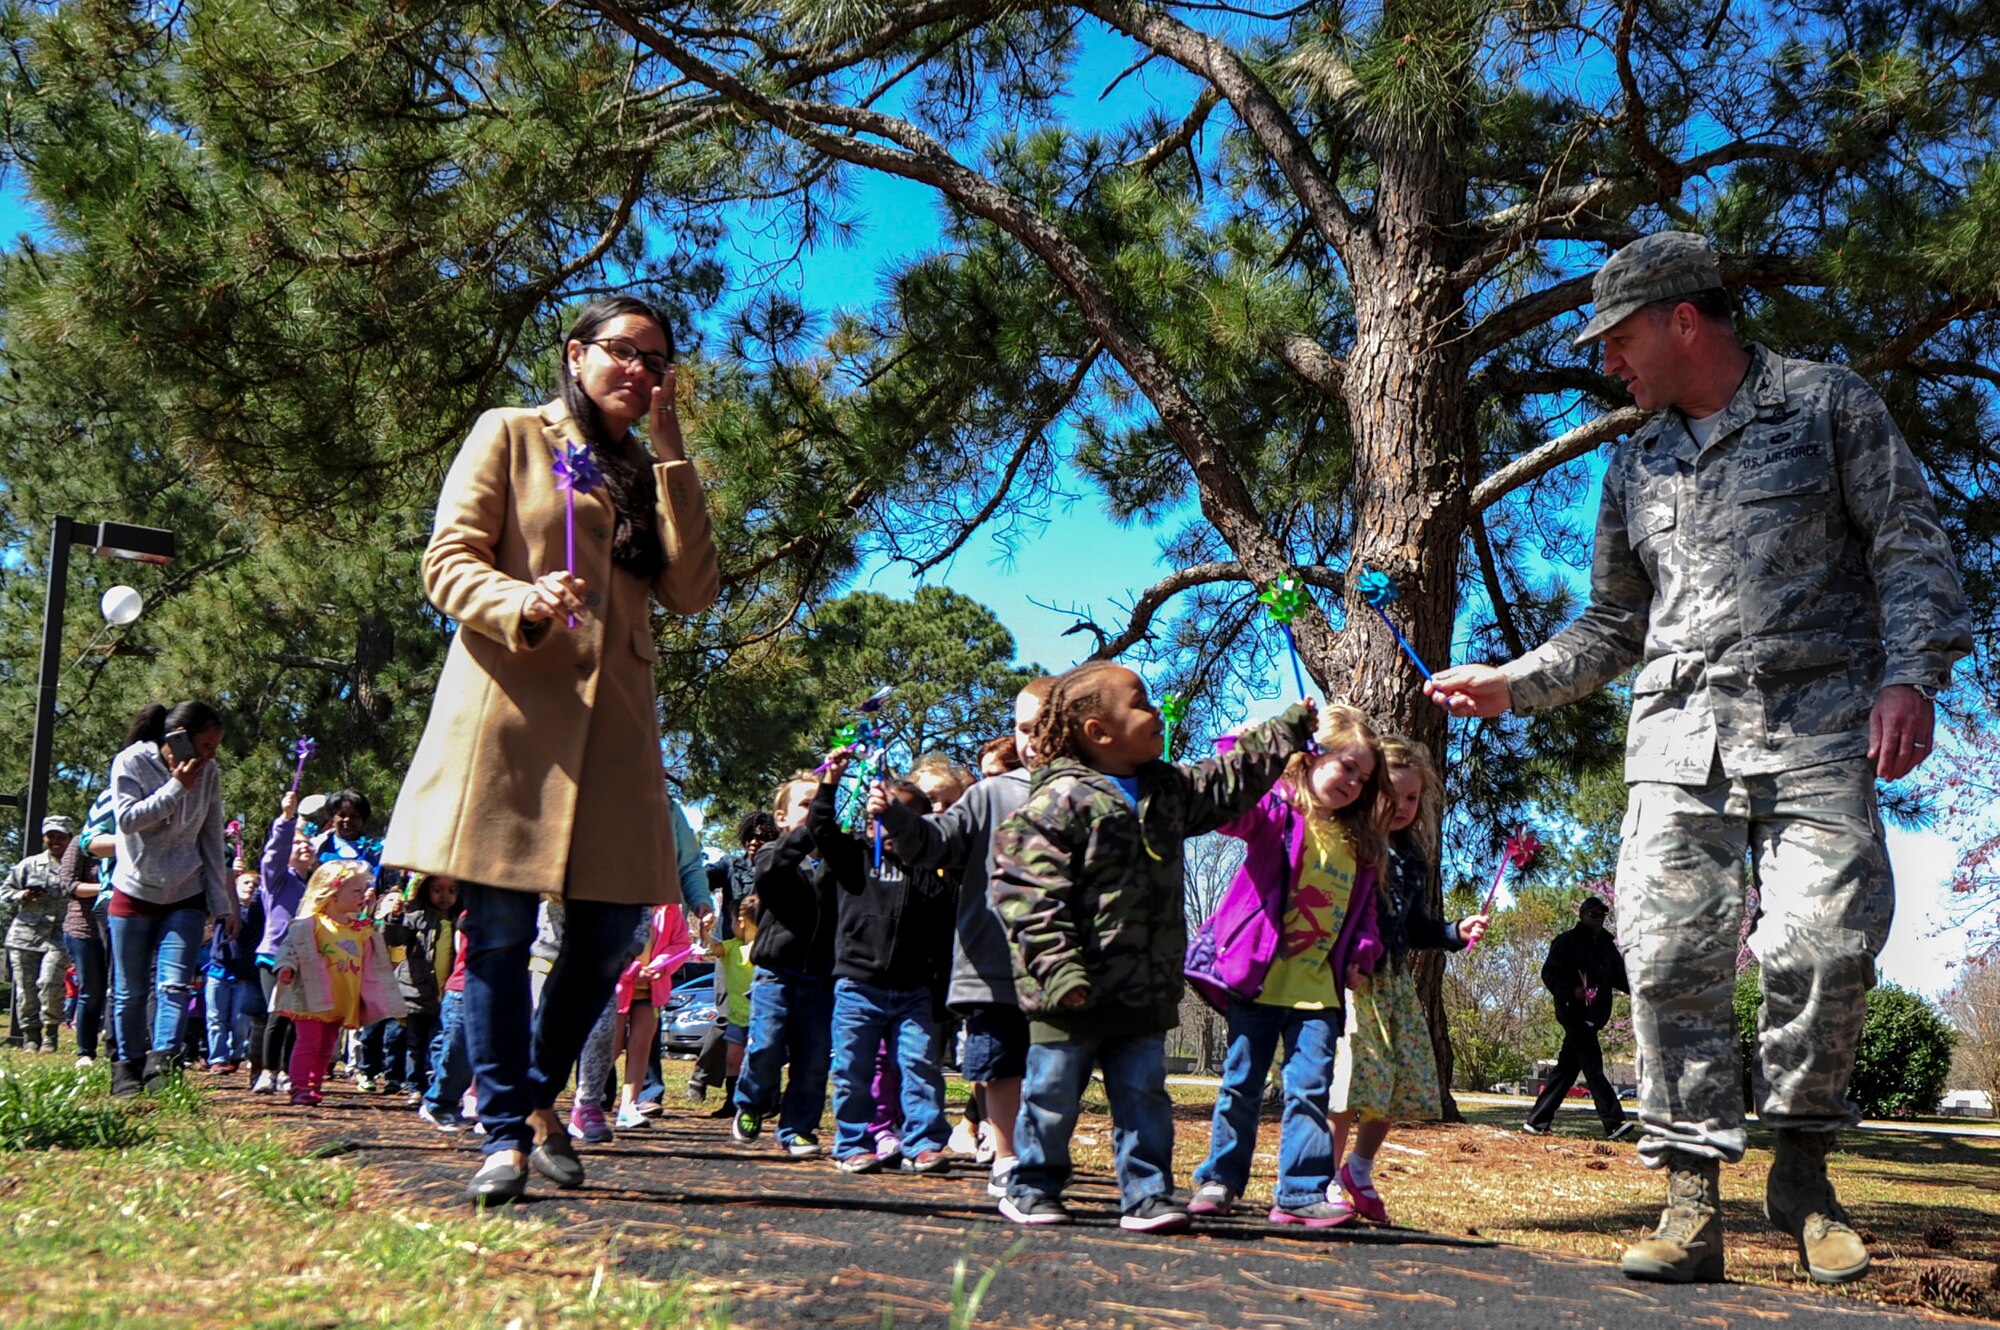 Col. Mark Slocum, 4th Fighter Wing commander, and his wife, Xavi, lead children on a walk to the pinwheel garden during a “Pinwheels for Child Abuse Prevention” event, April 1, 2015, at Seymour Johnson Air Force Base, North Carolina. The campaign works to ensure the healthy development of children nationwide. (U.S Air Force photo/Senior Airman Brittain Crolley)